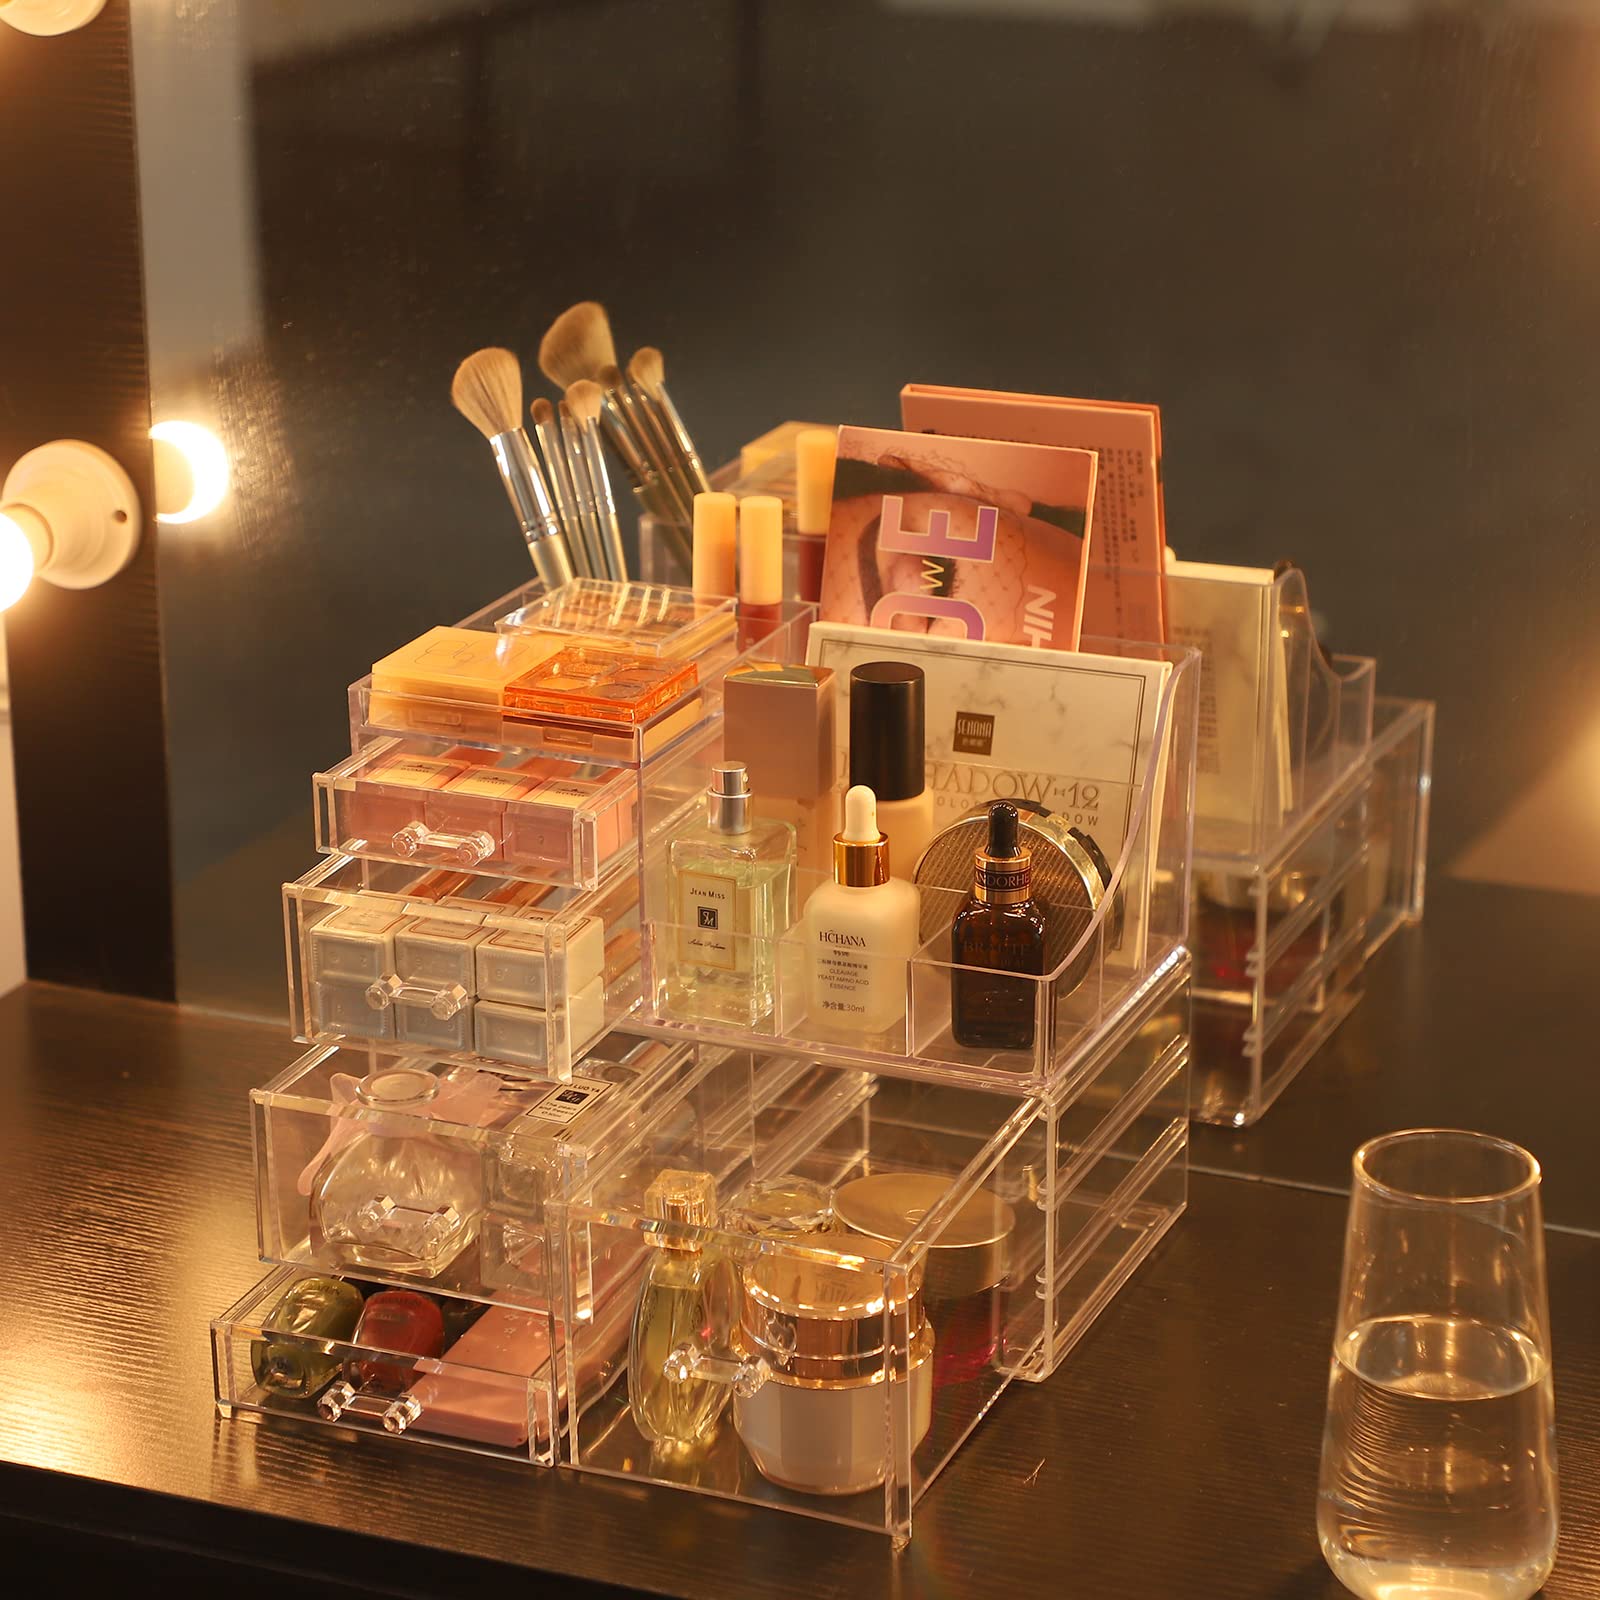 PENGKE Clear Makeup Organizer With Drawers,Stackable Cosmetic Storage Display Case for Vanity, Bathroom Counter or Dresser,Countertop Holder for Lipstick,Brushes,Eyeshadow,Nail Polish and Jewelry